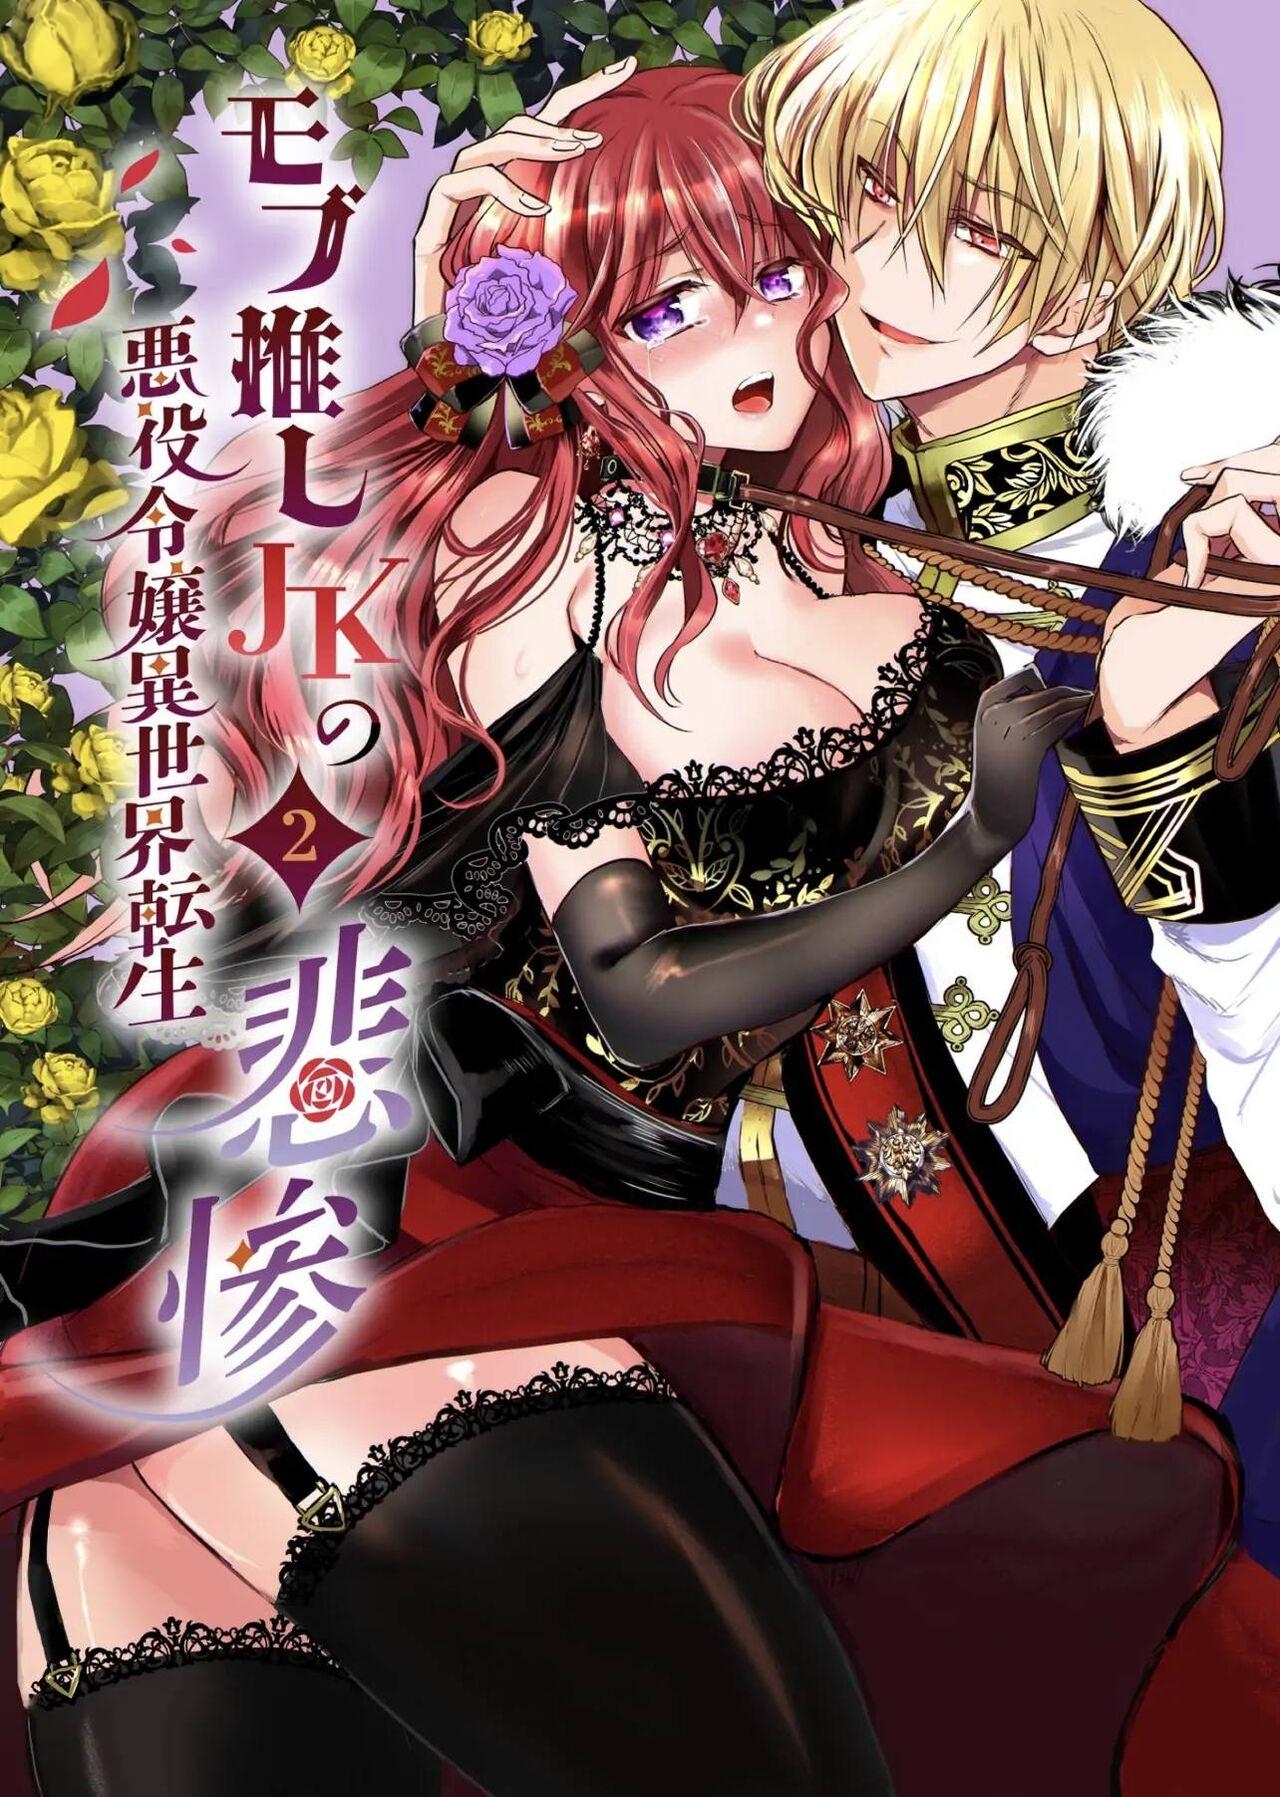 [Whisker Pad (Mofuo)] JK's Tragic Isekai Reincarnation as the Villainess ~But My Precious Side Character!~ 2 [English] [Digital] 0